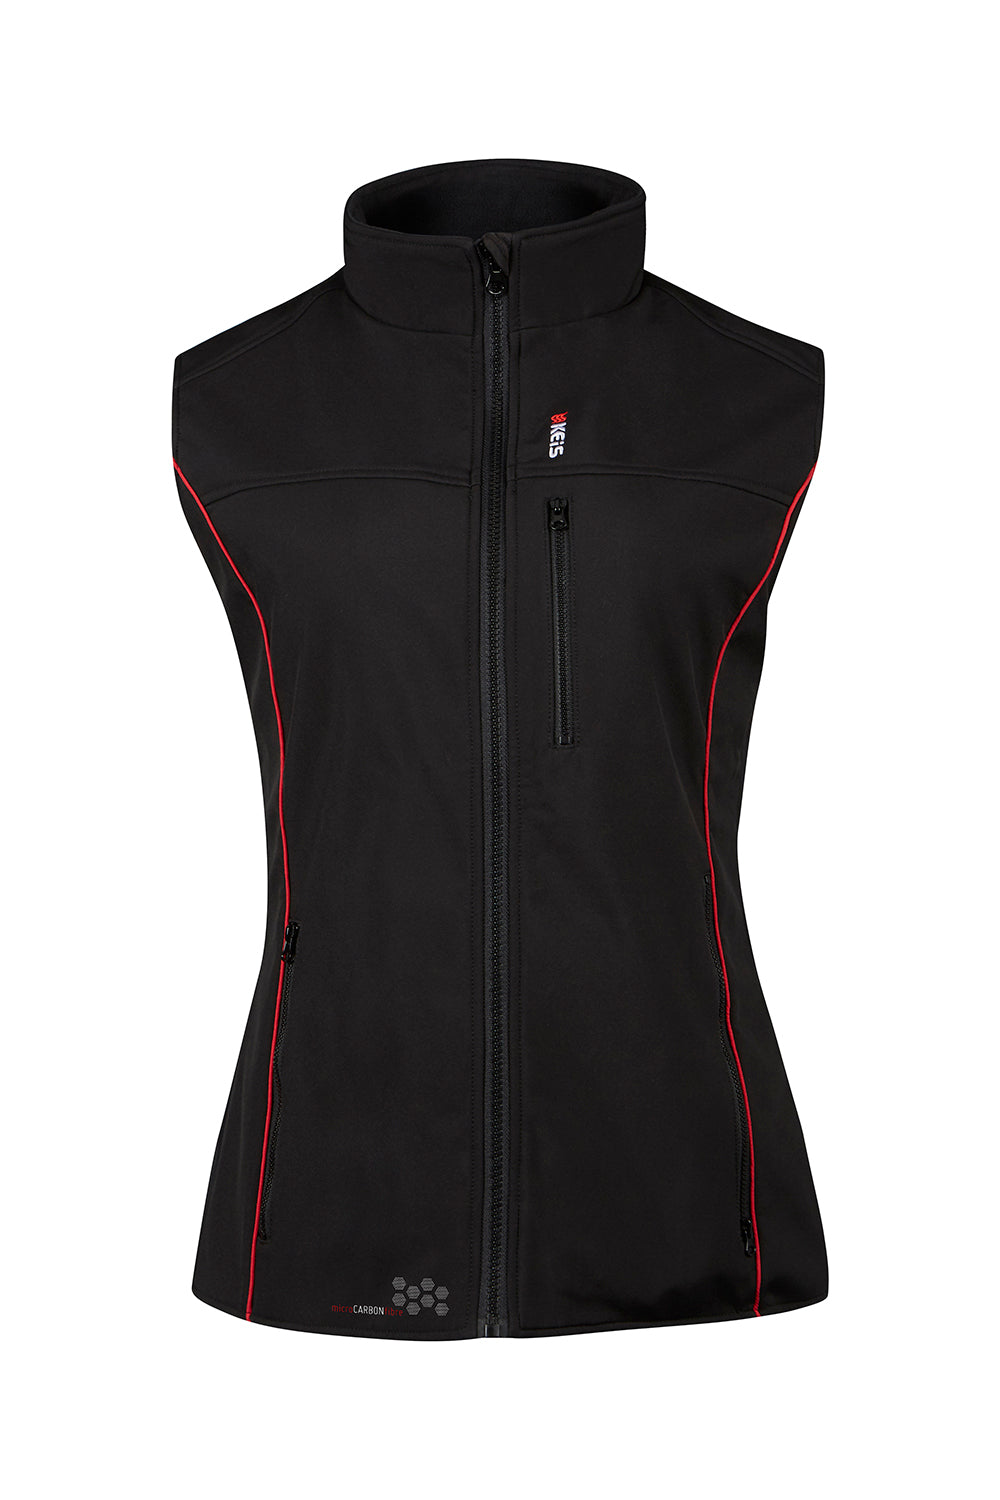 Keis ladies bodywarmer balck with red piping down front